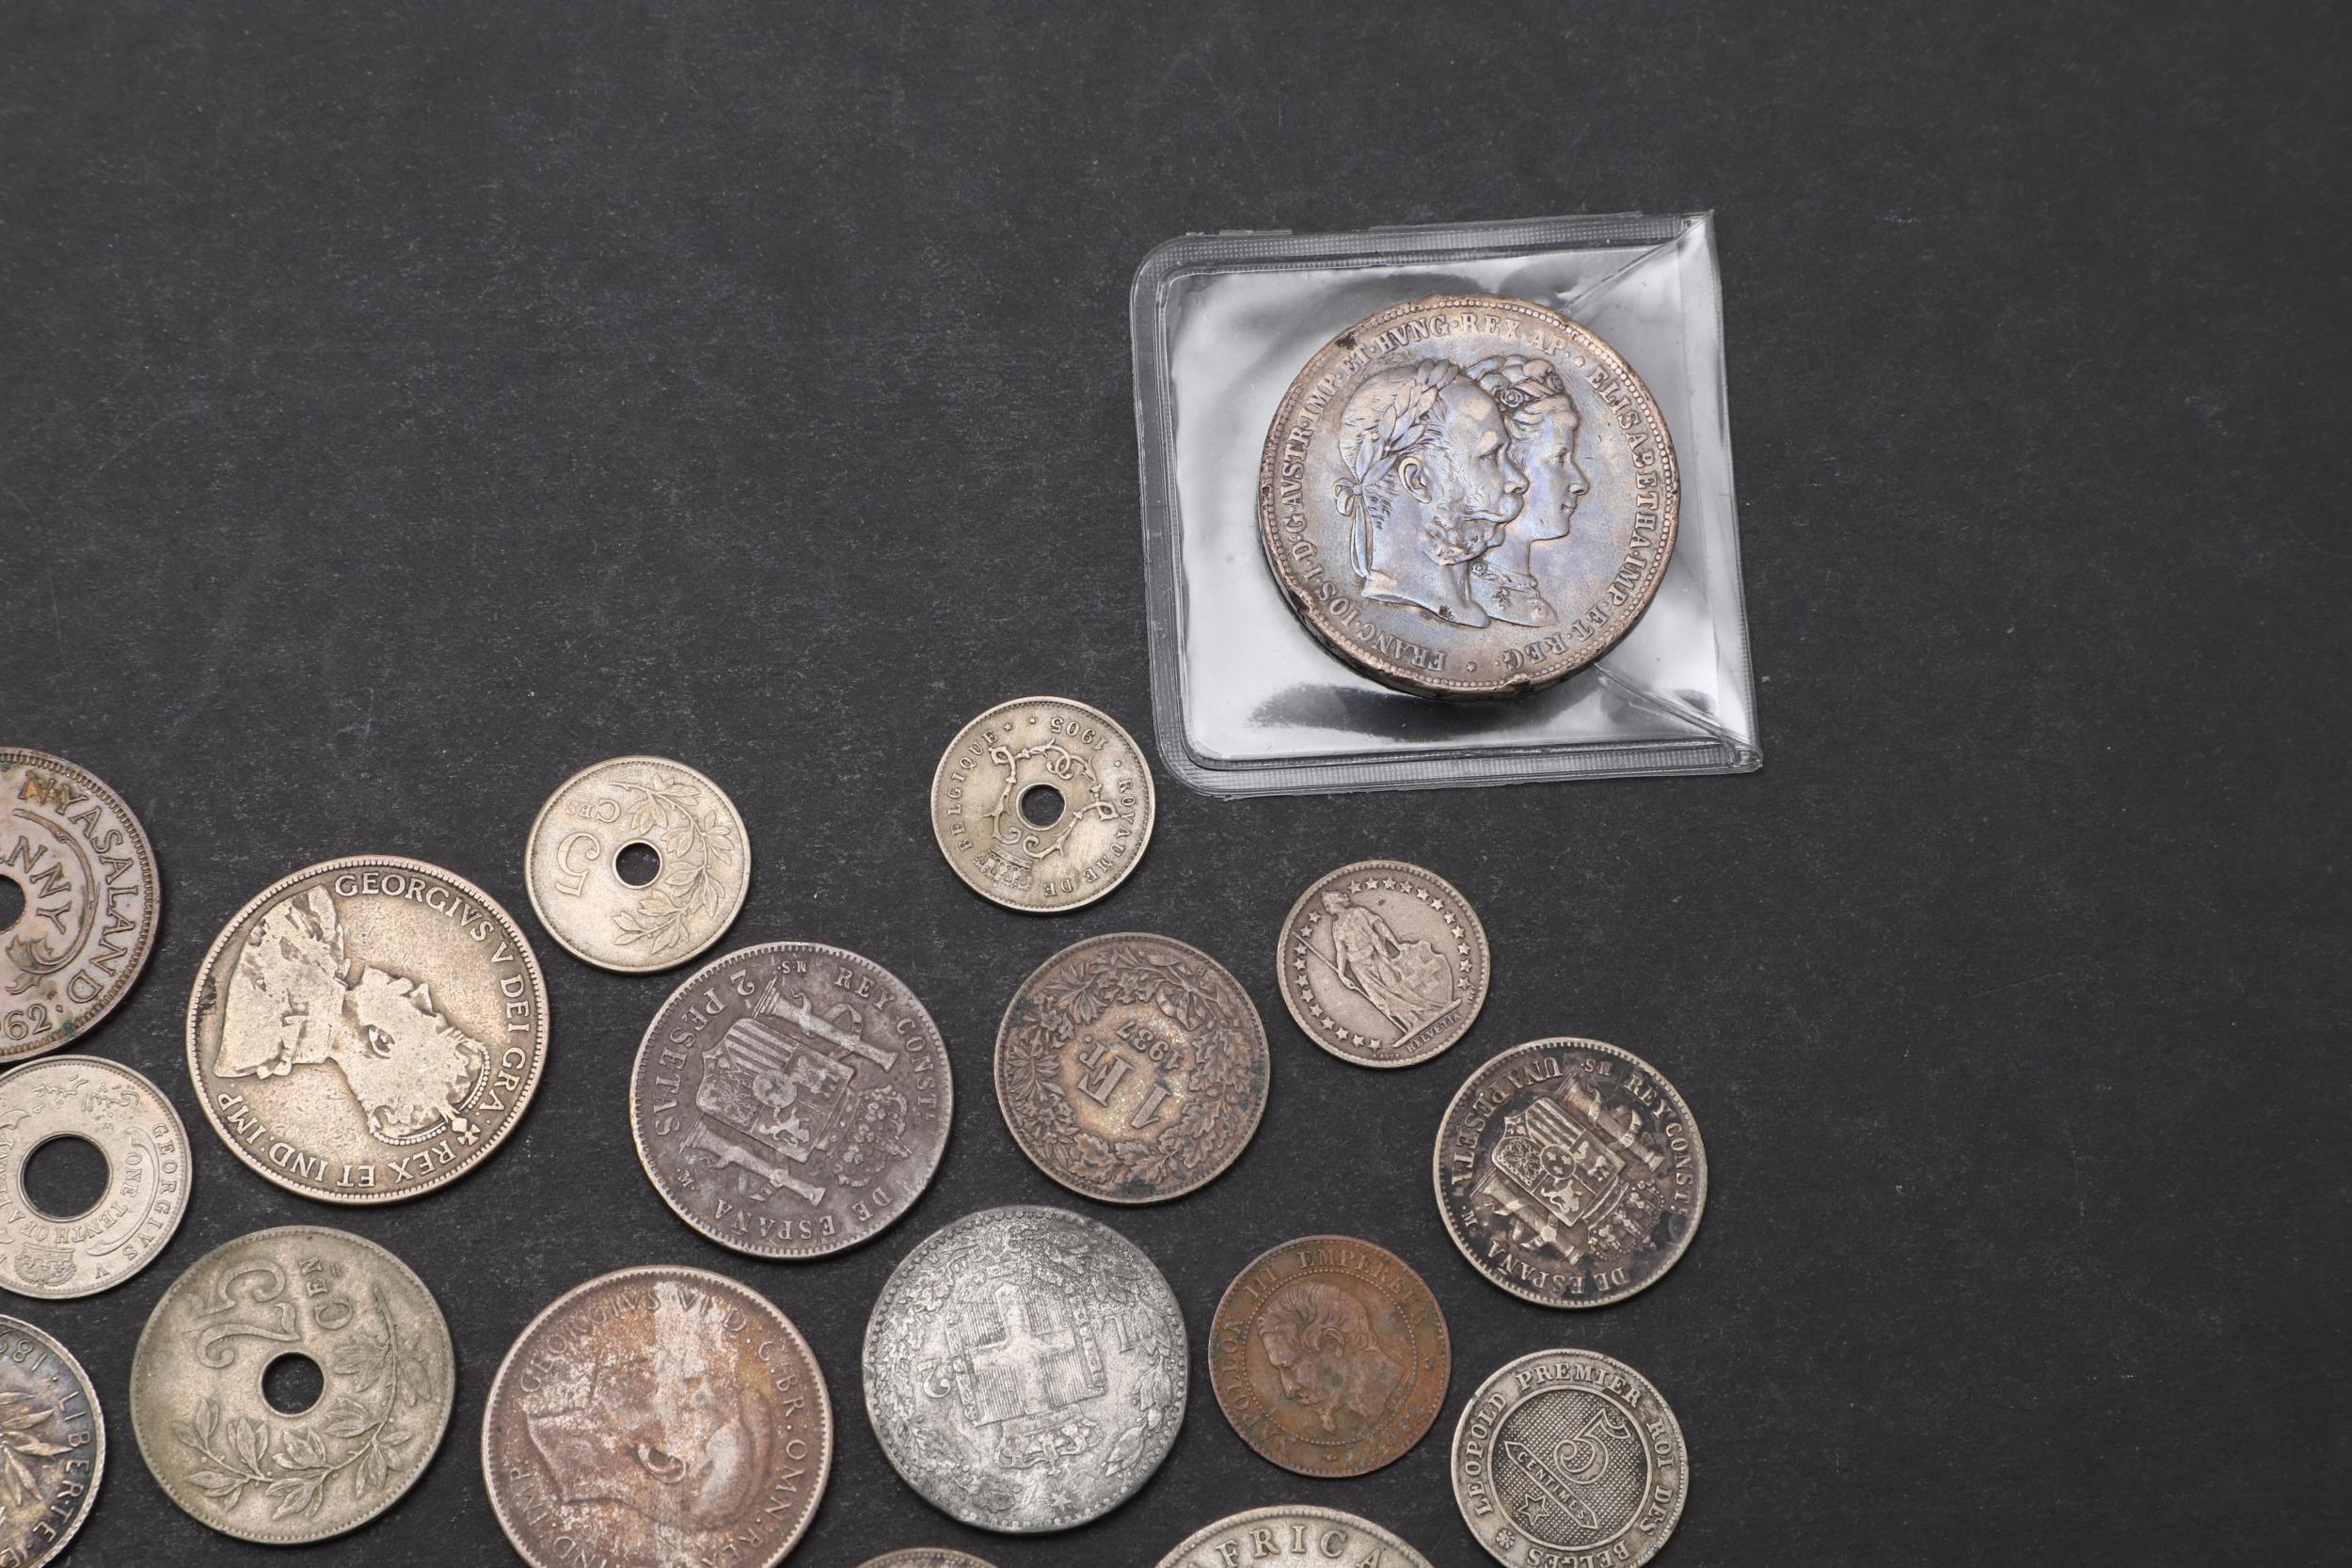 AN INTERESTING COLLECTION OF SOUTH AFRICAN AND OTHER WORLD COINS. - Image 6 of 7